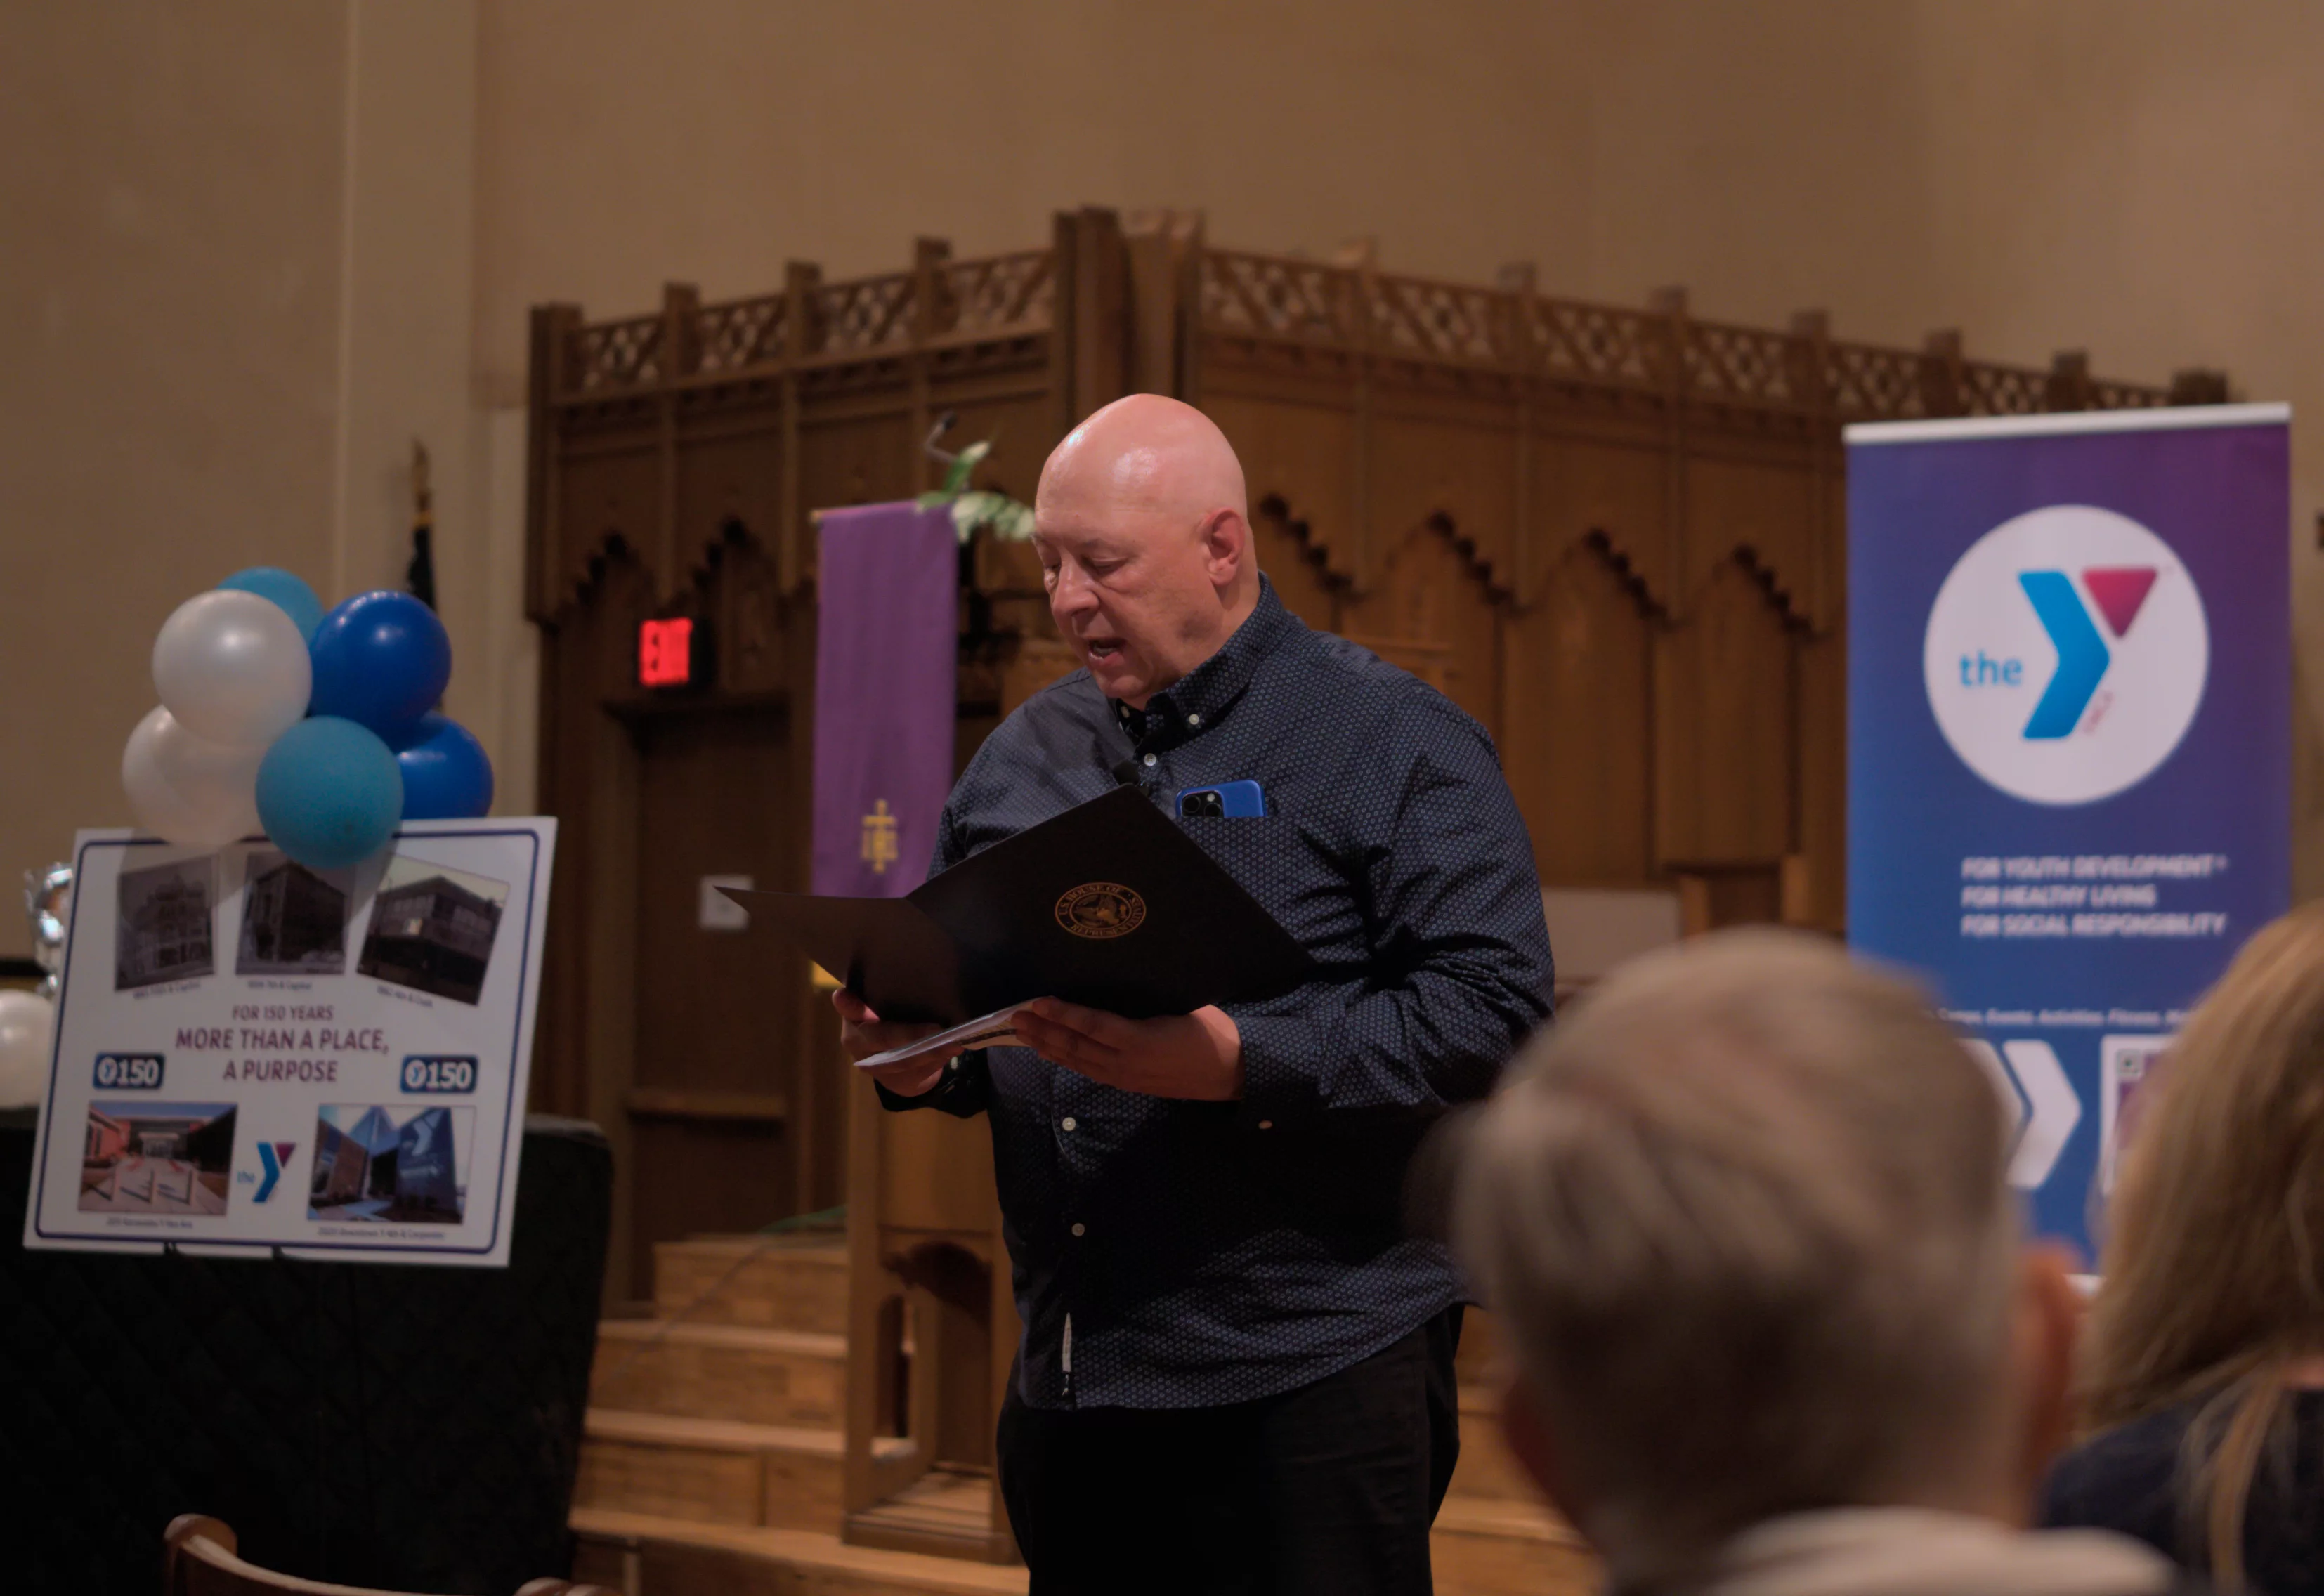 Lou Bart, Springfield YMCA Communications Director, speaking at the First Presbyterian Church of Springfield